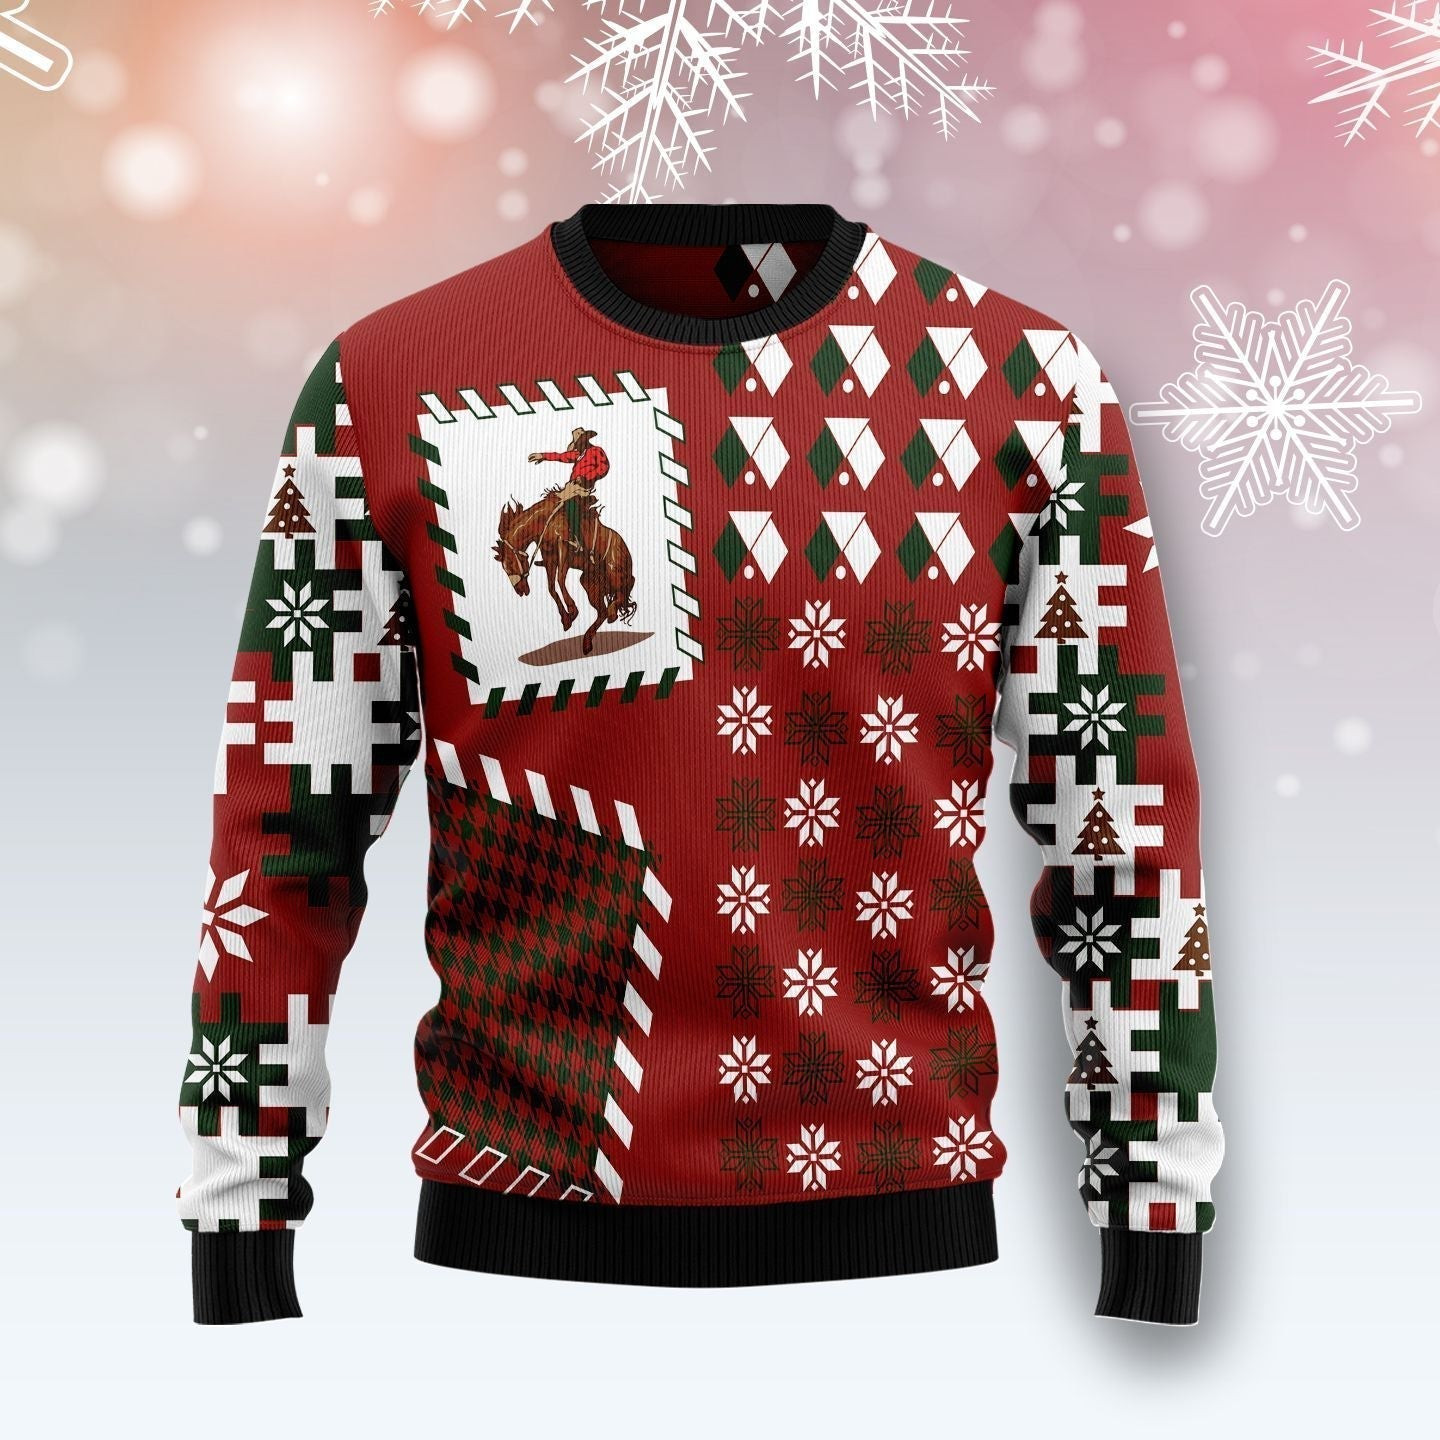 Awesome Cowboy Ugly Christmas Sweater Ugly Sweater For Men Women, Holiday Sweater